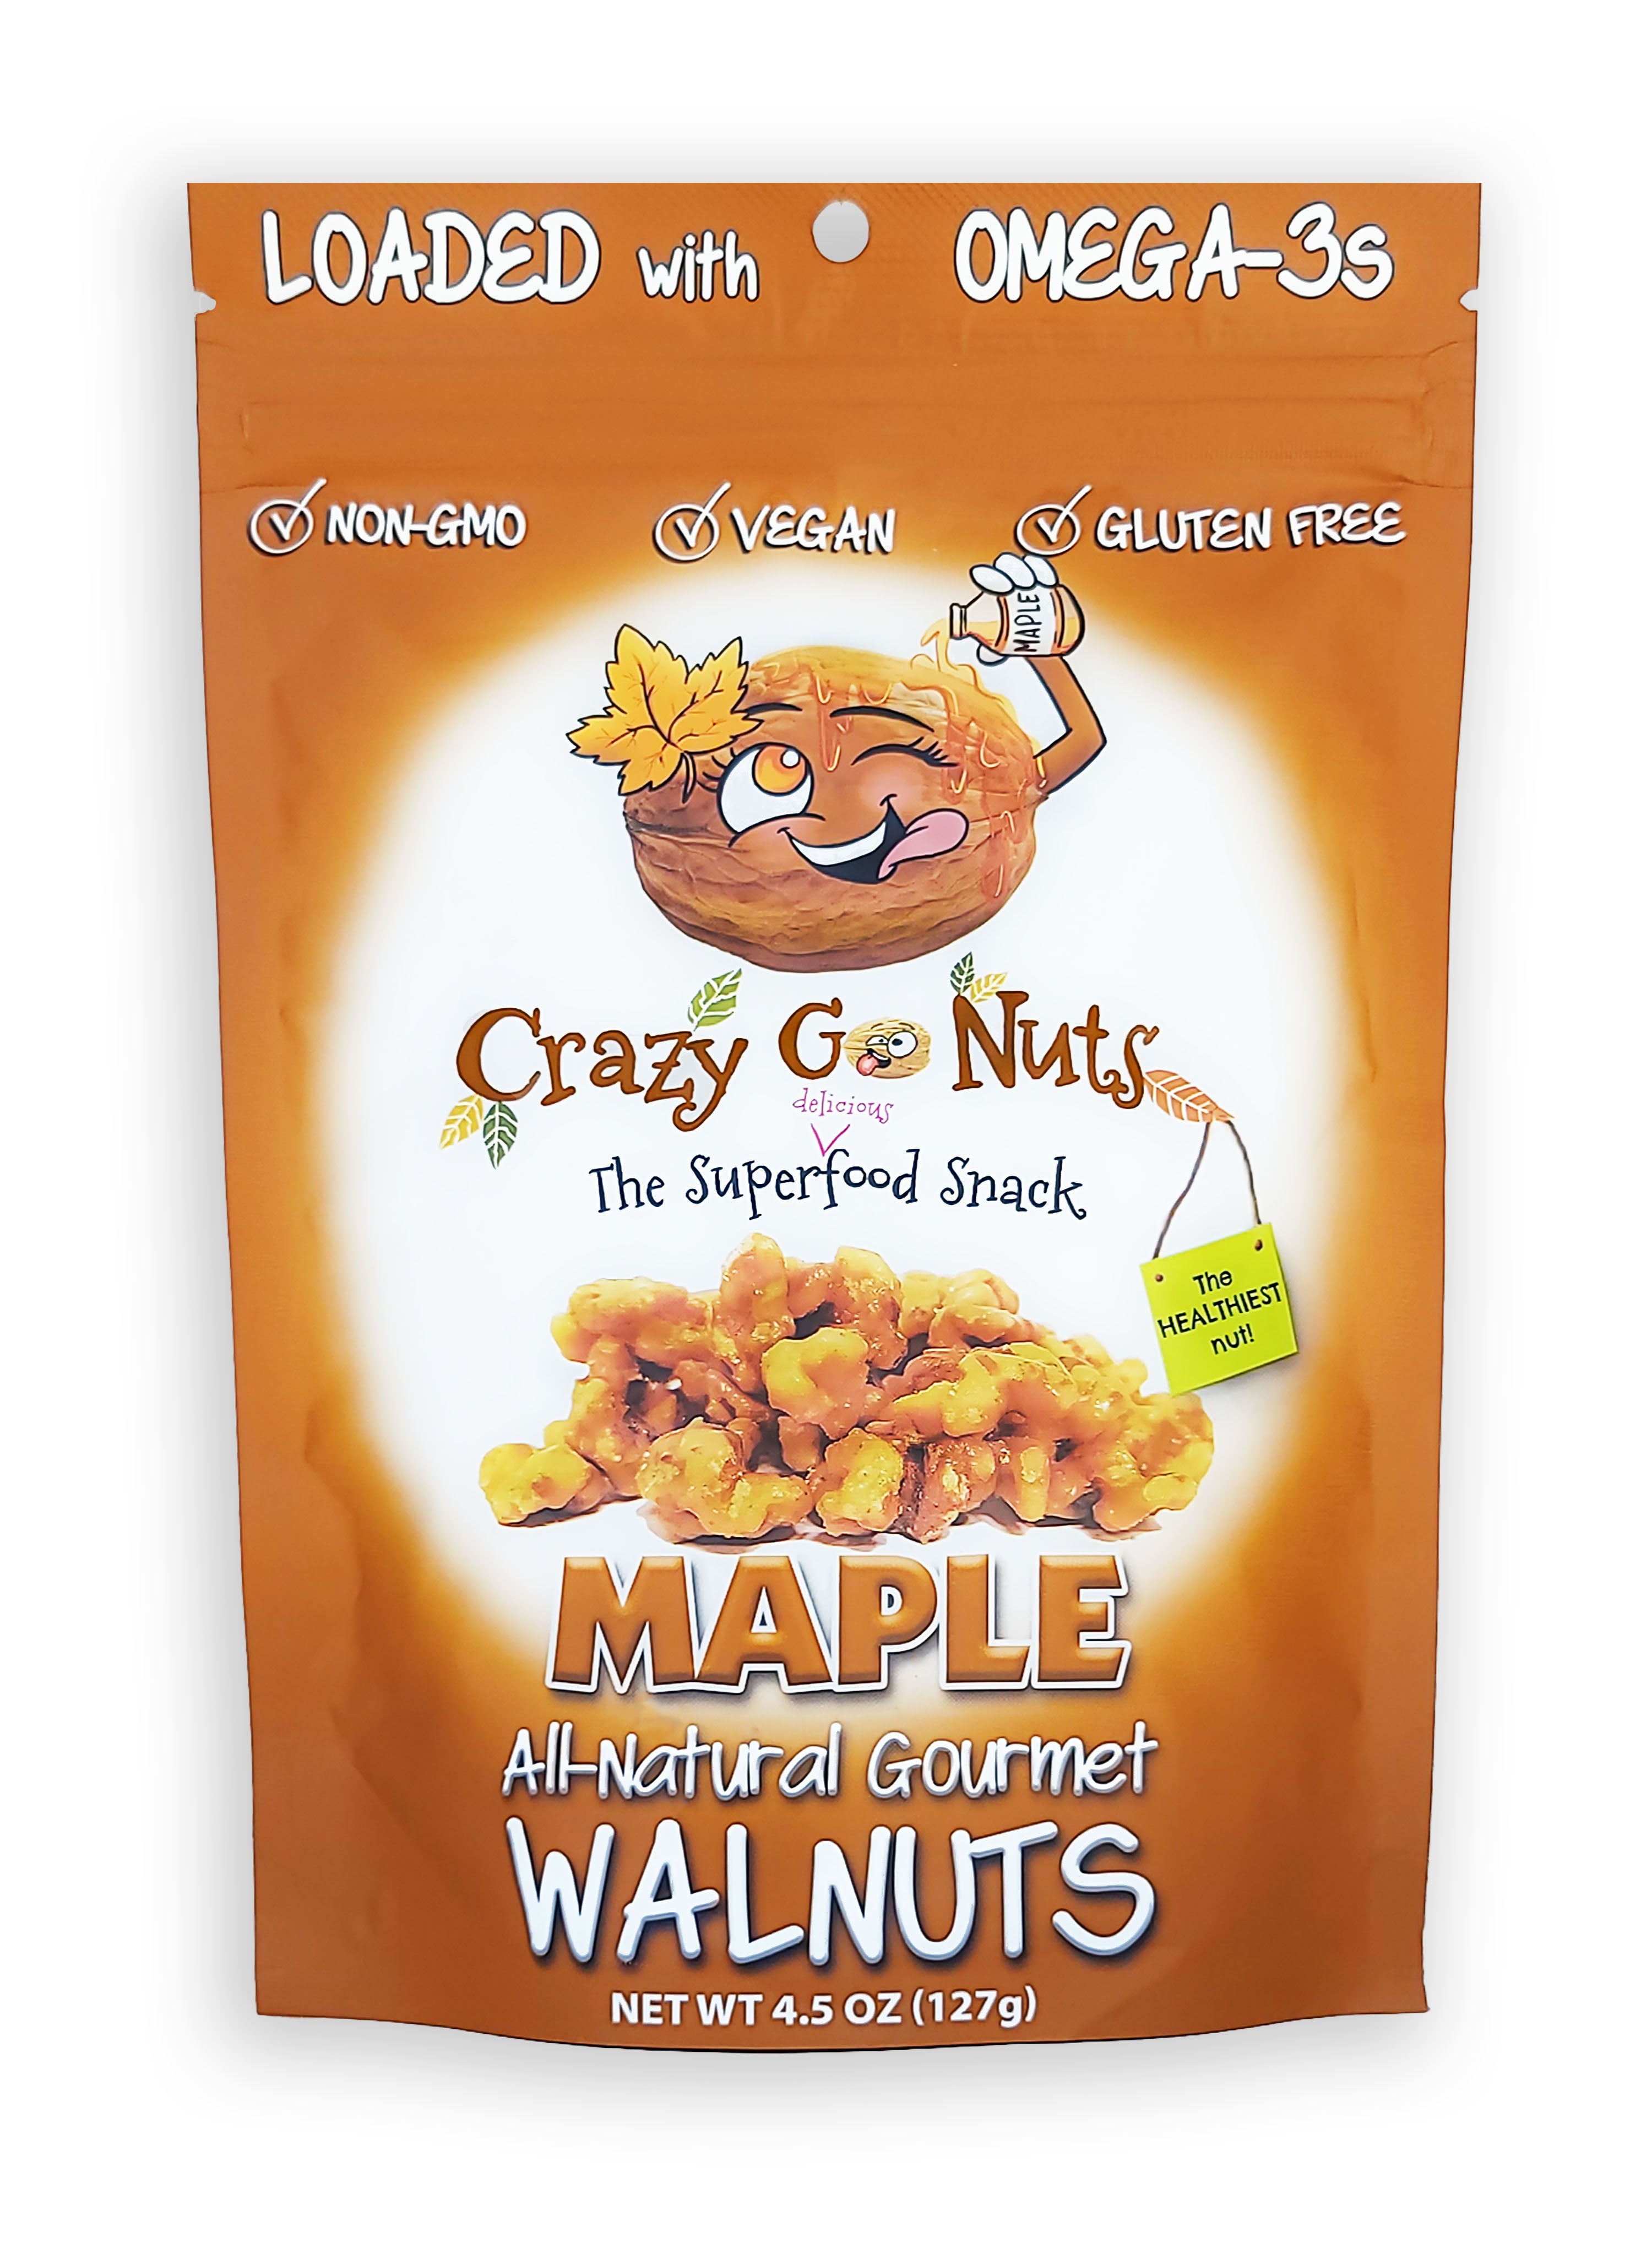 The front of a bag of maple coated walnut snacks